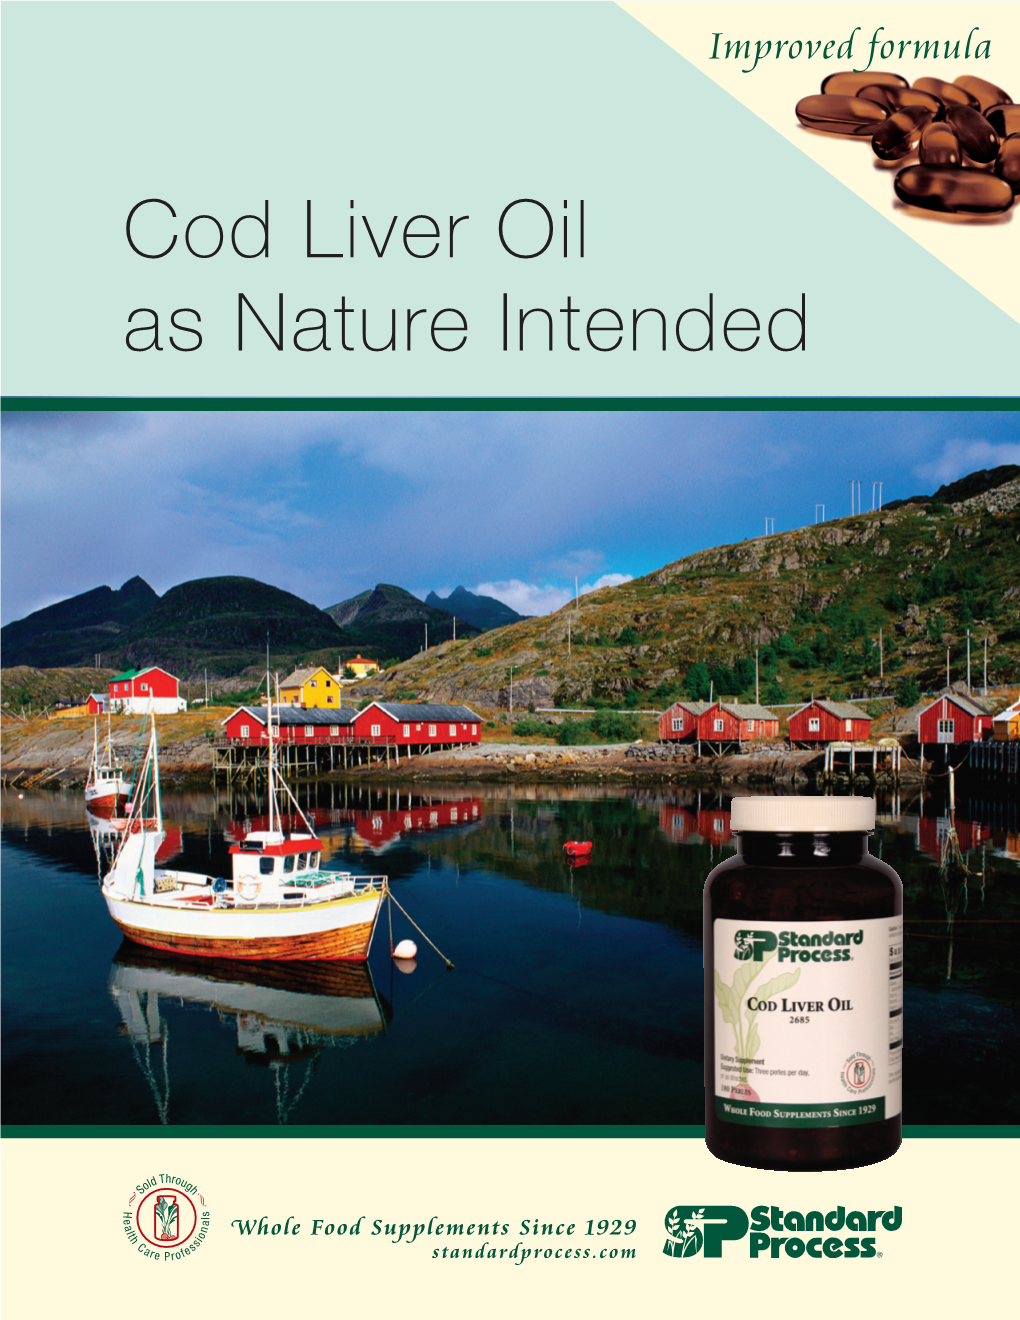 Cod Liver Oil As Nature Intended